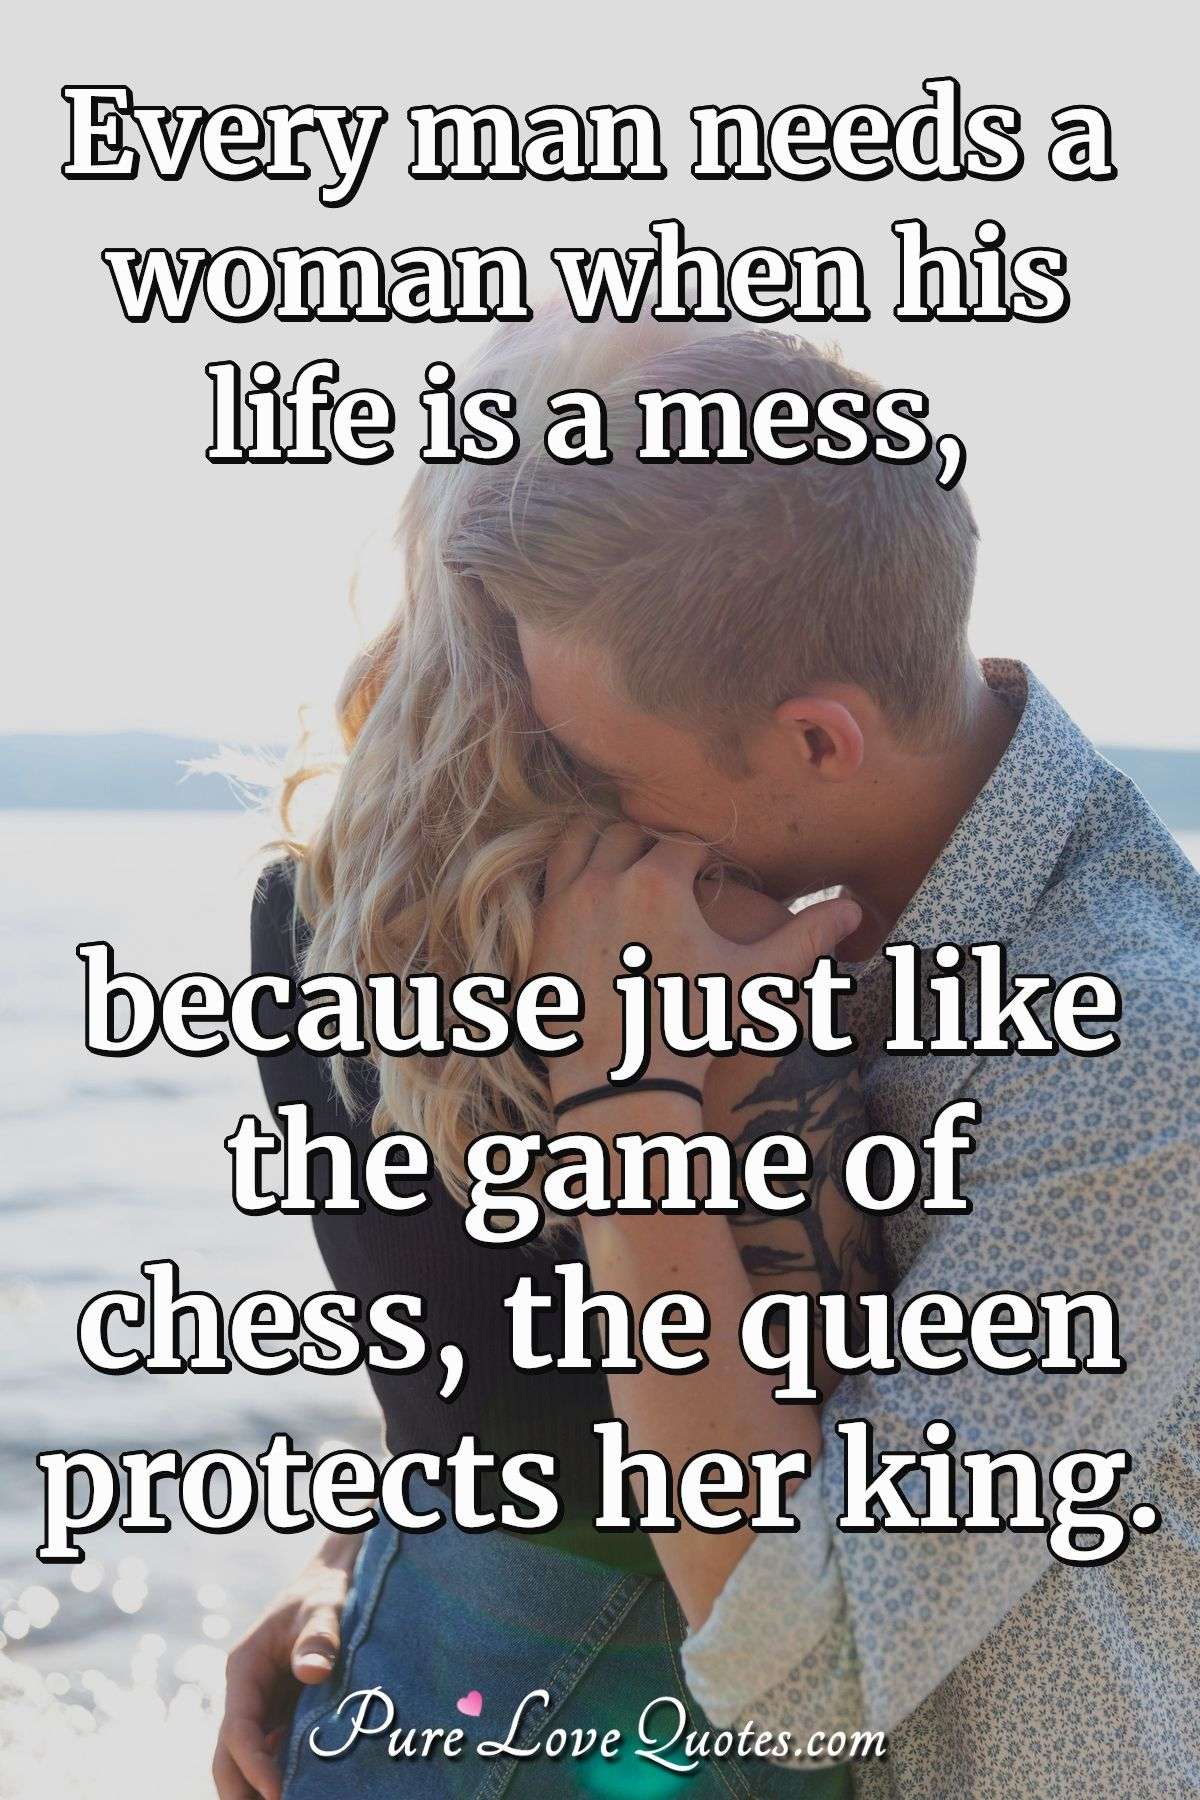 Every man needs a woman when his life is a mess, because just like the game of chess, the queen protects her king. - Anonymous